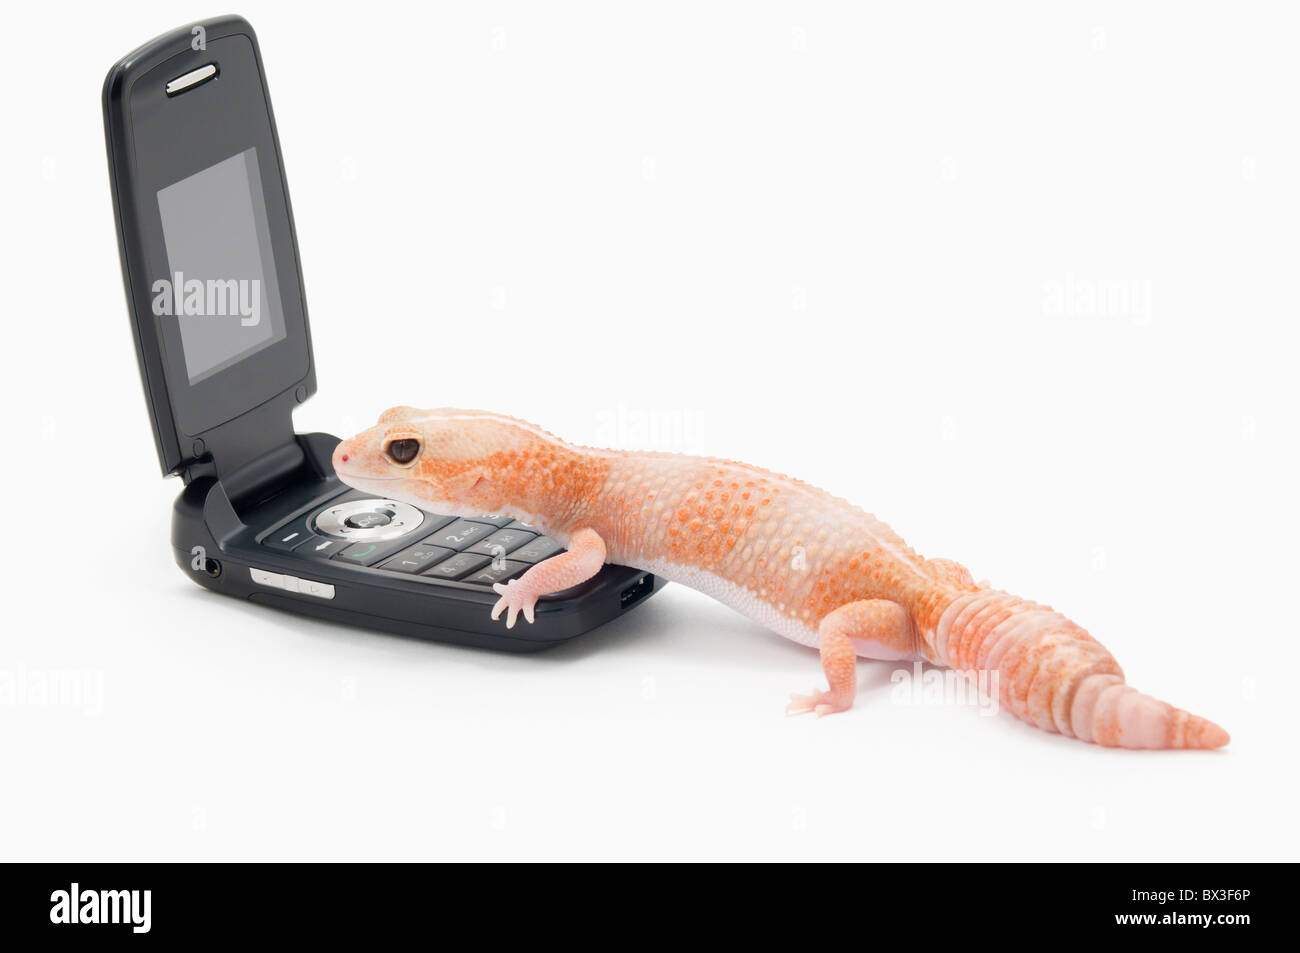 Albino African Fat-Tailed Gecko (Hemitheconyx Caudicinctus) Using A Cell Phone Stock Photo